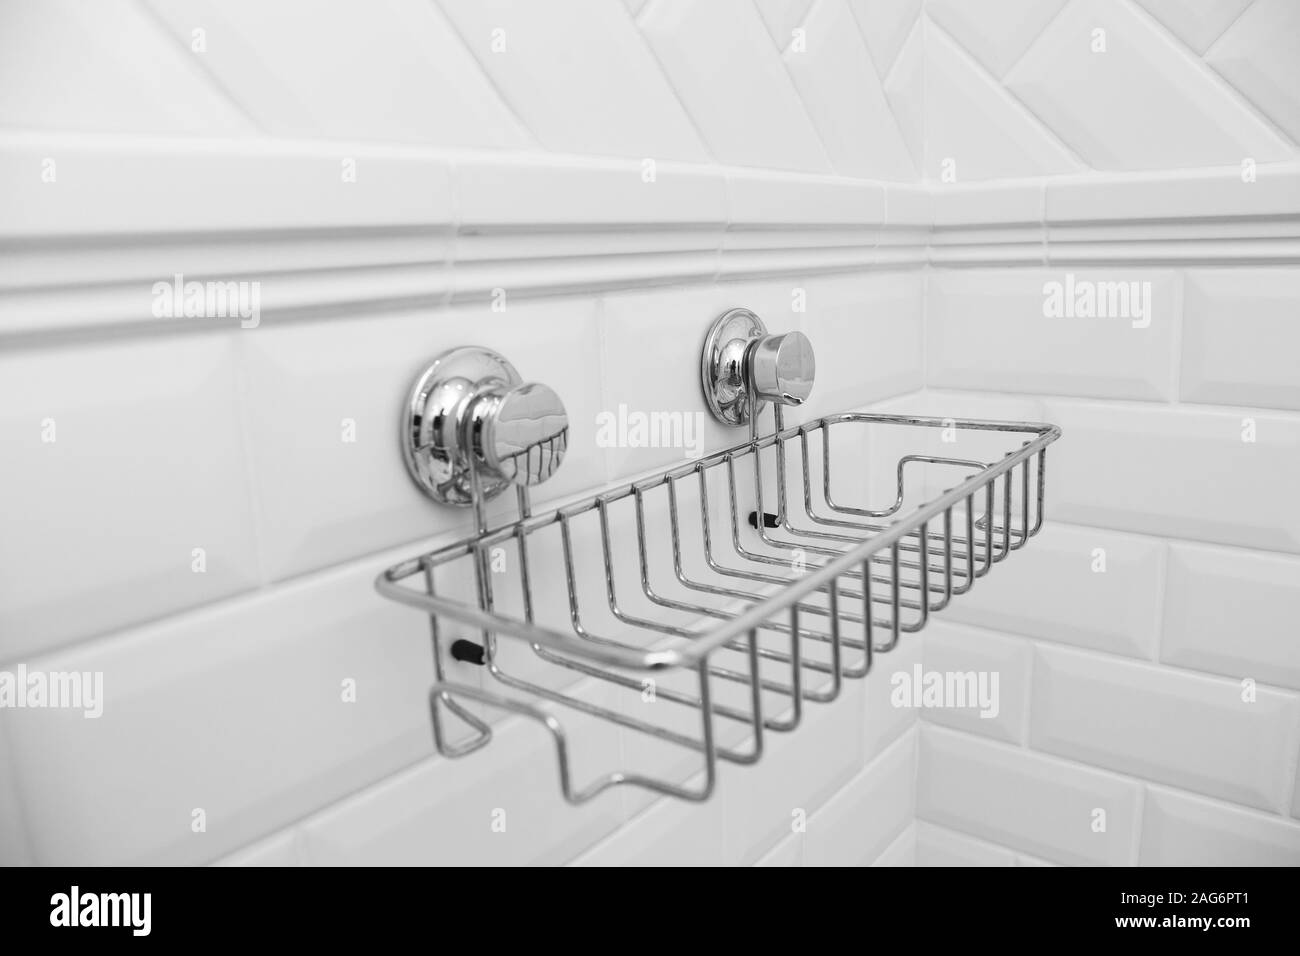 https://c8.alamy.com/comp/2AG6PT1/suction-cups-compact-bath-shelf-fixing-on-tiled-wall-without-drilling-2AG6PT1.jpg